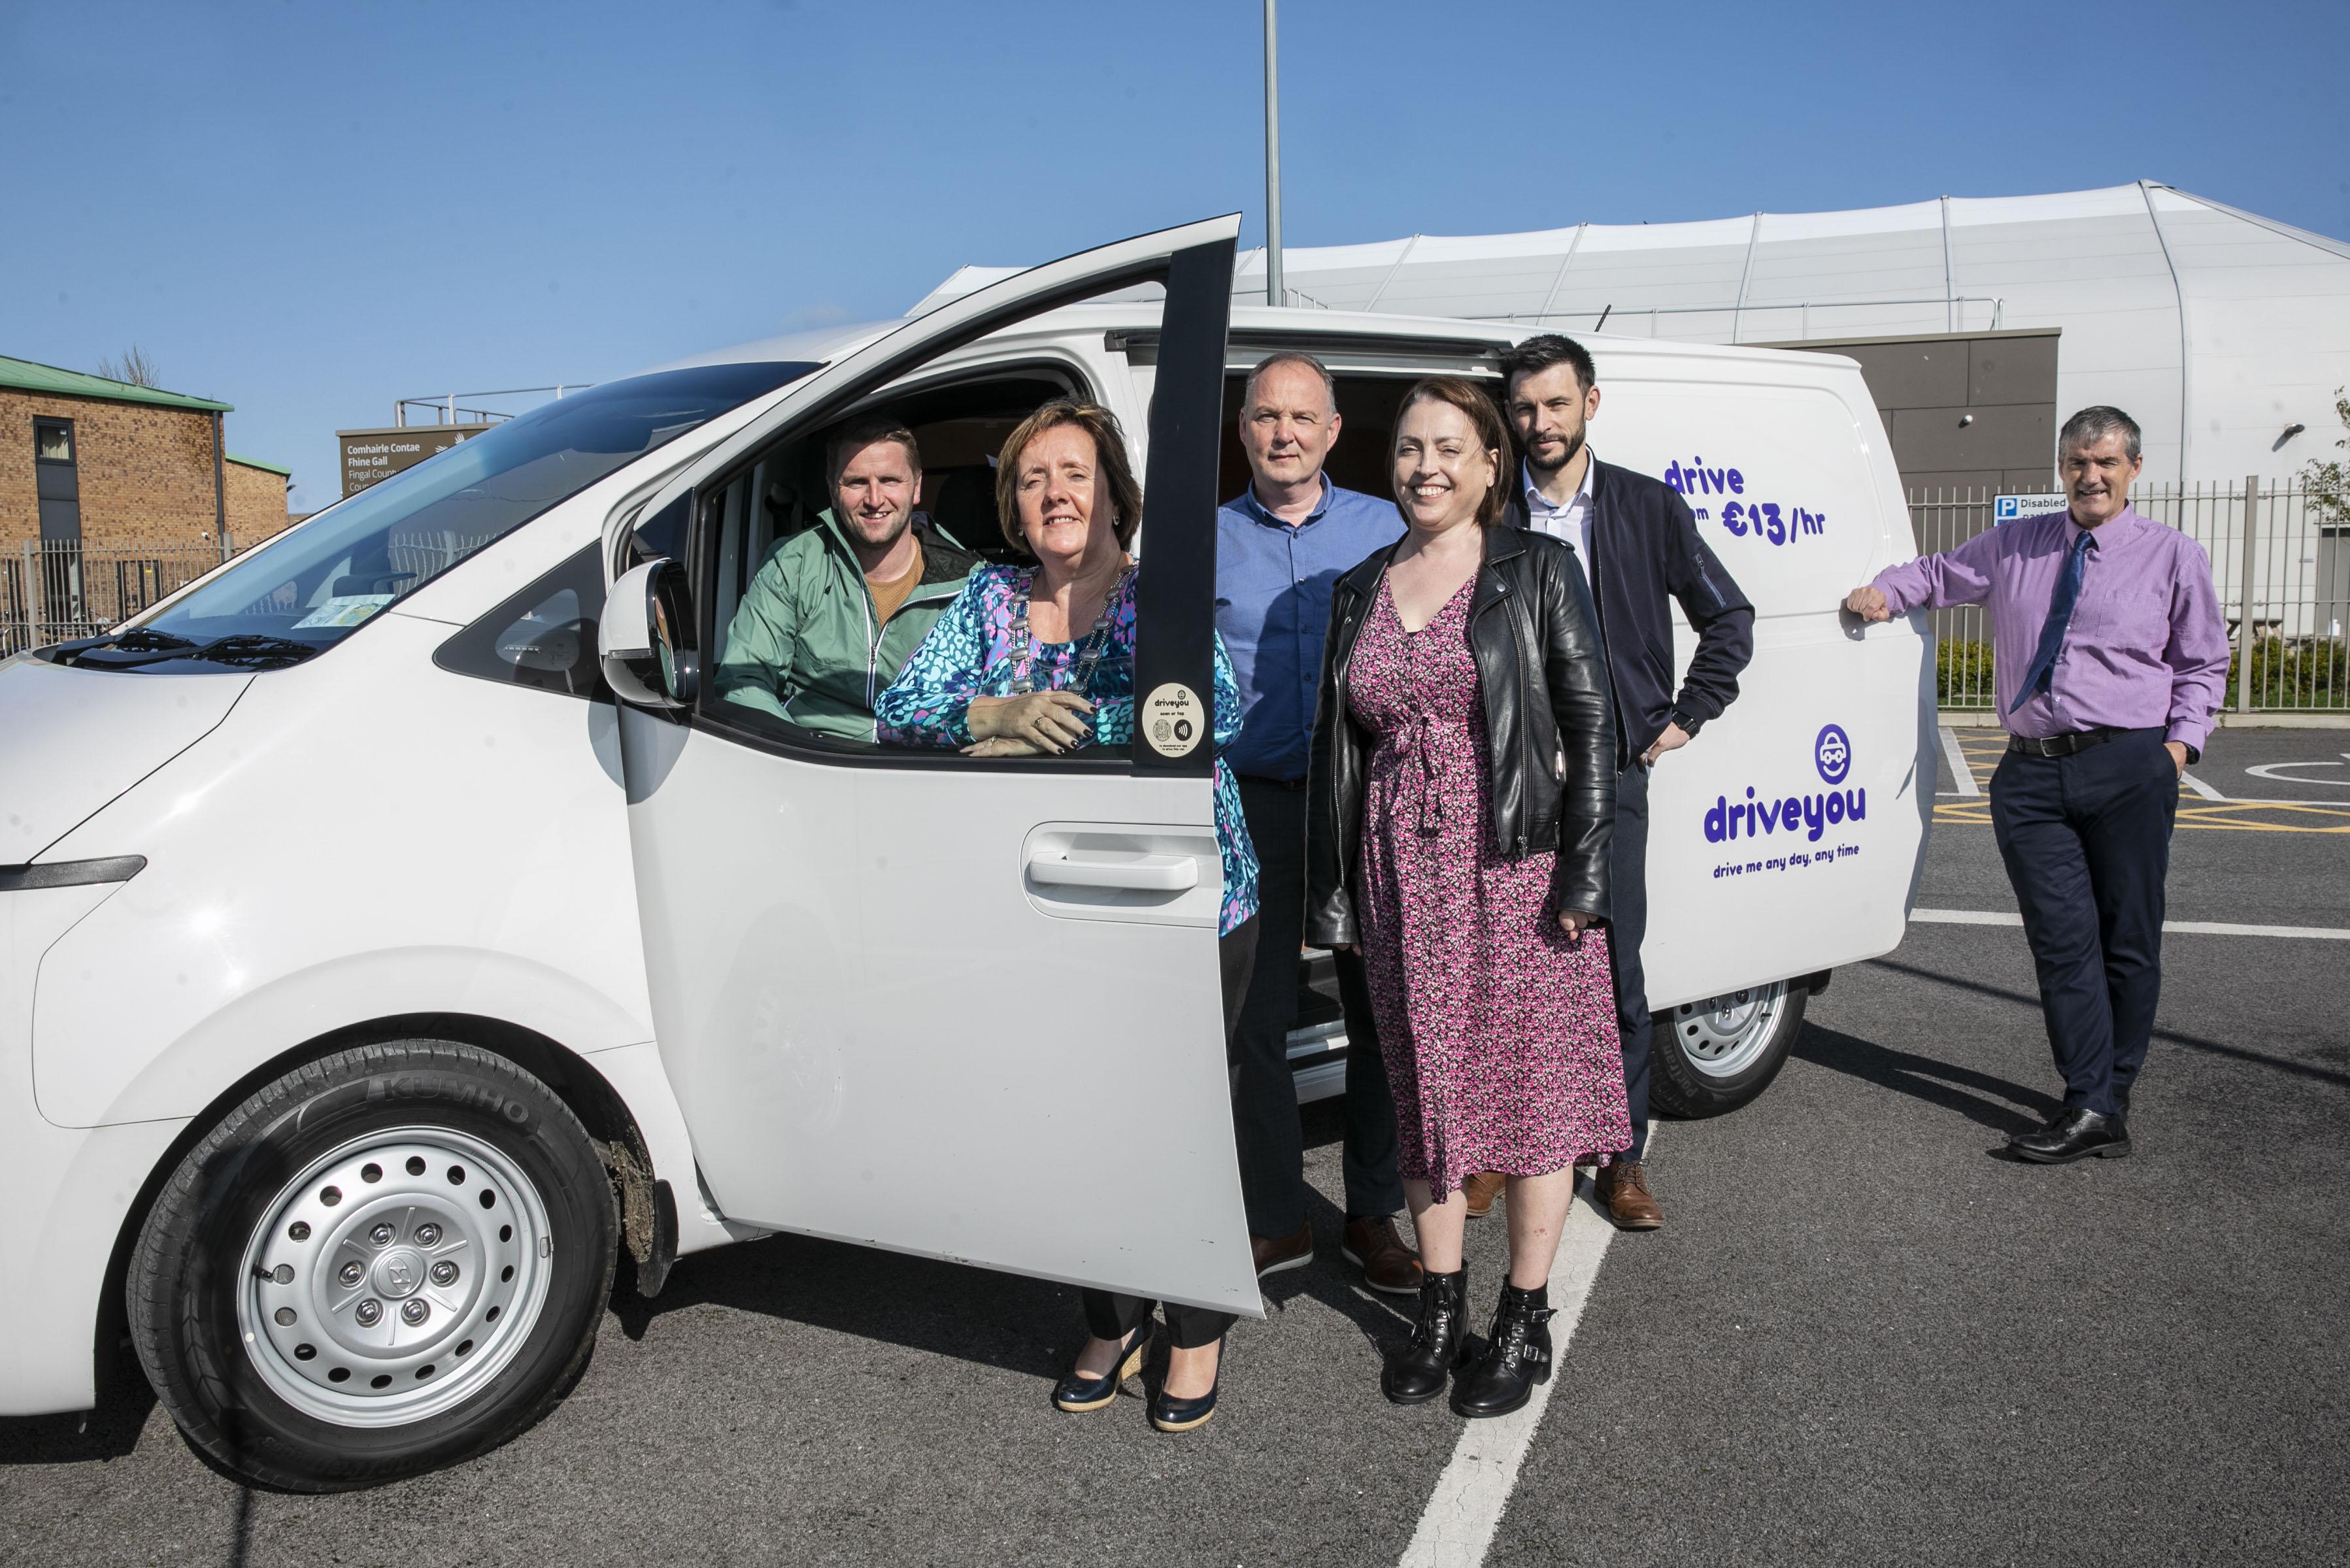 Fingal county council staff celebrate launch of Drive You service at Liam Rodgers centre